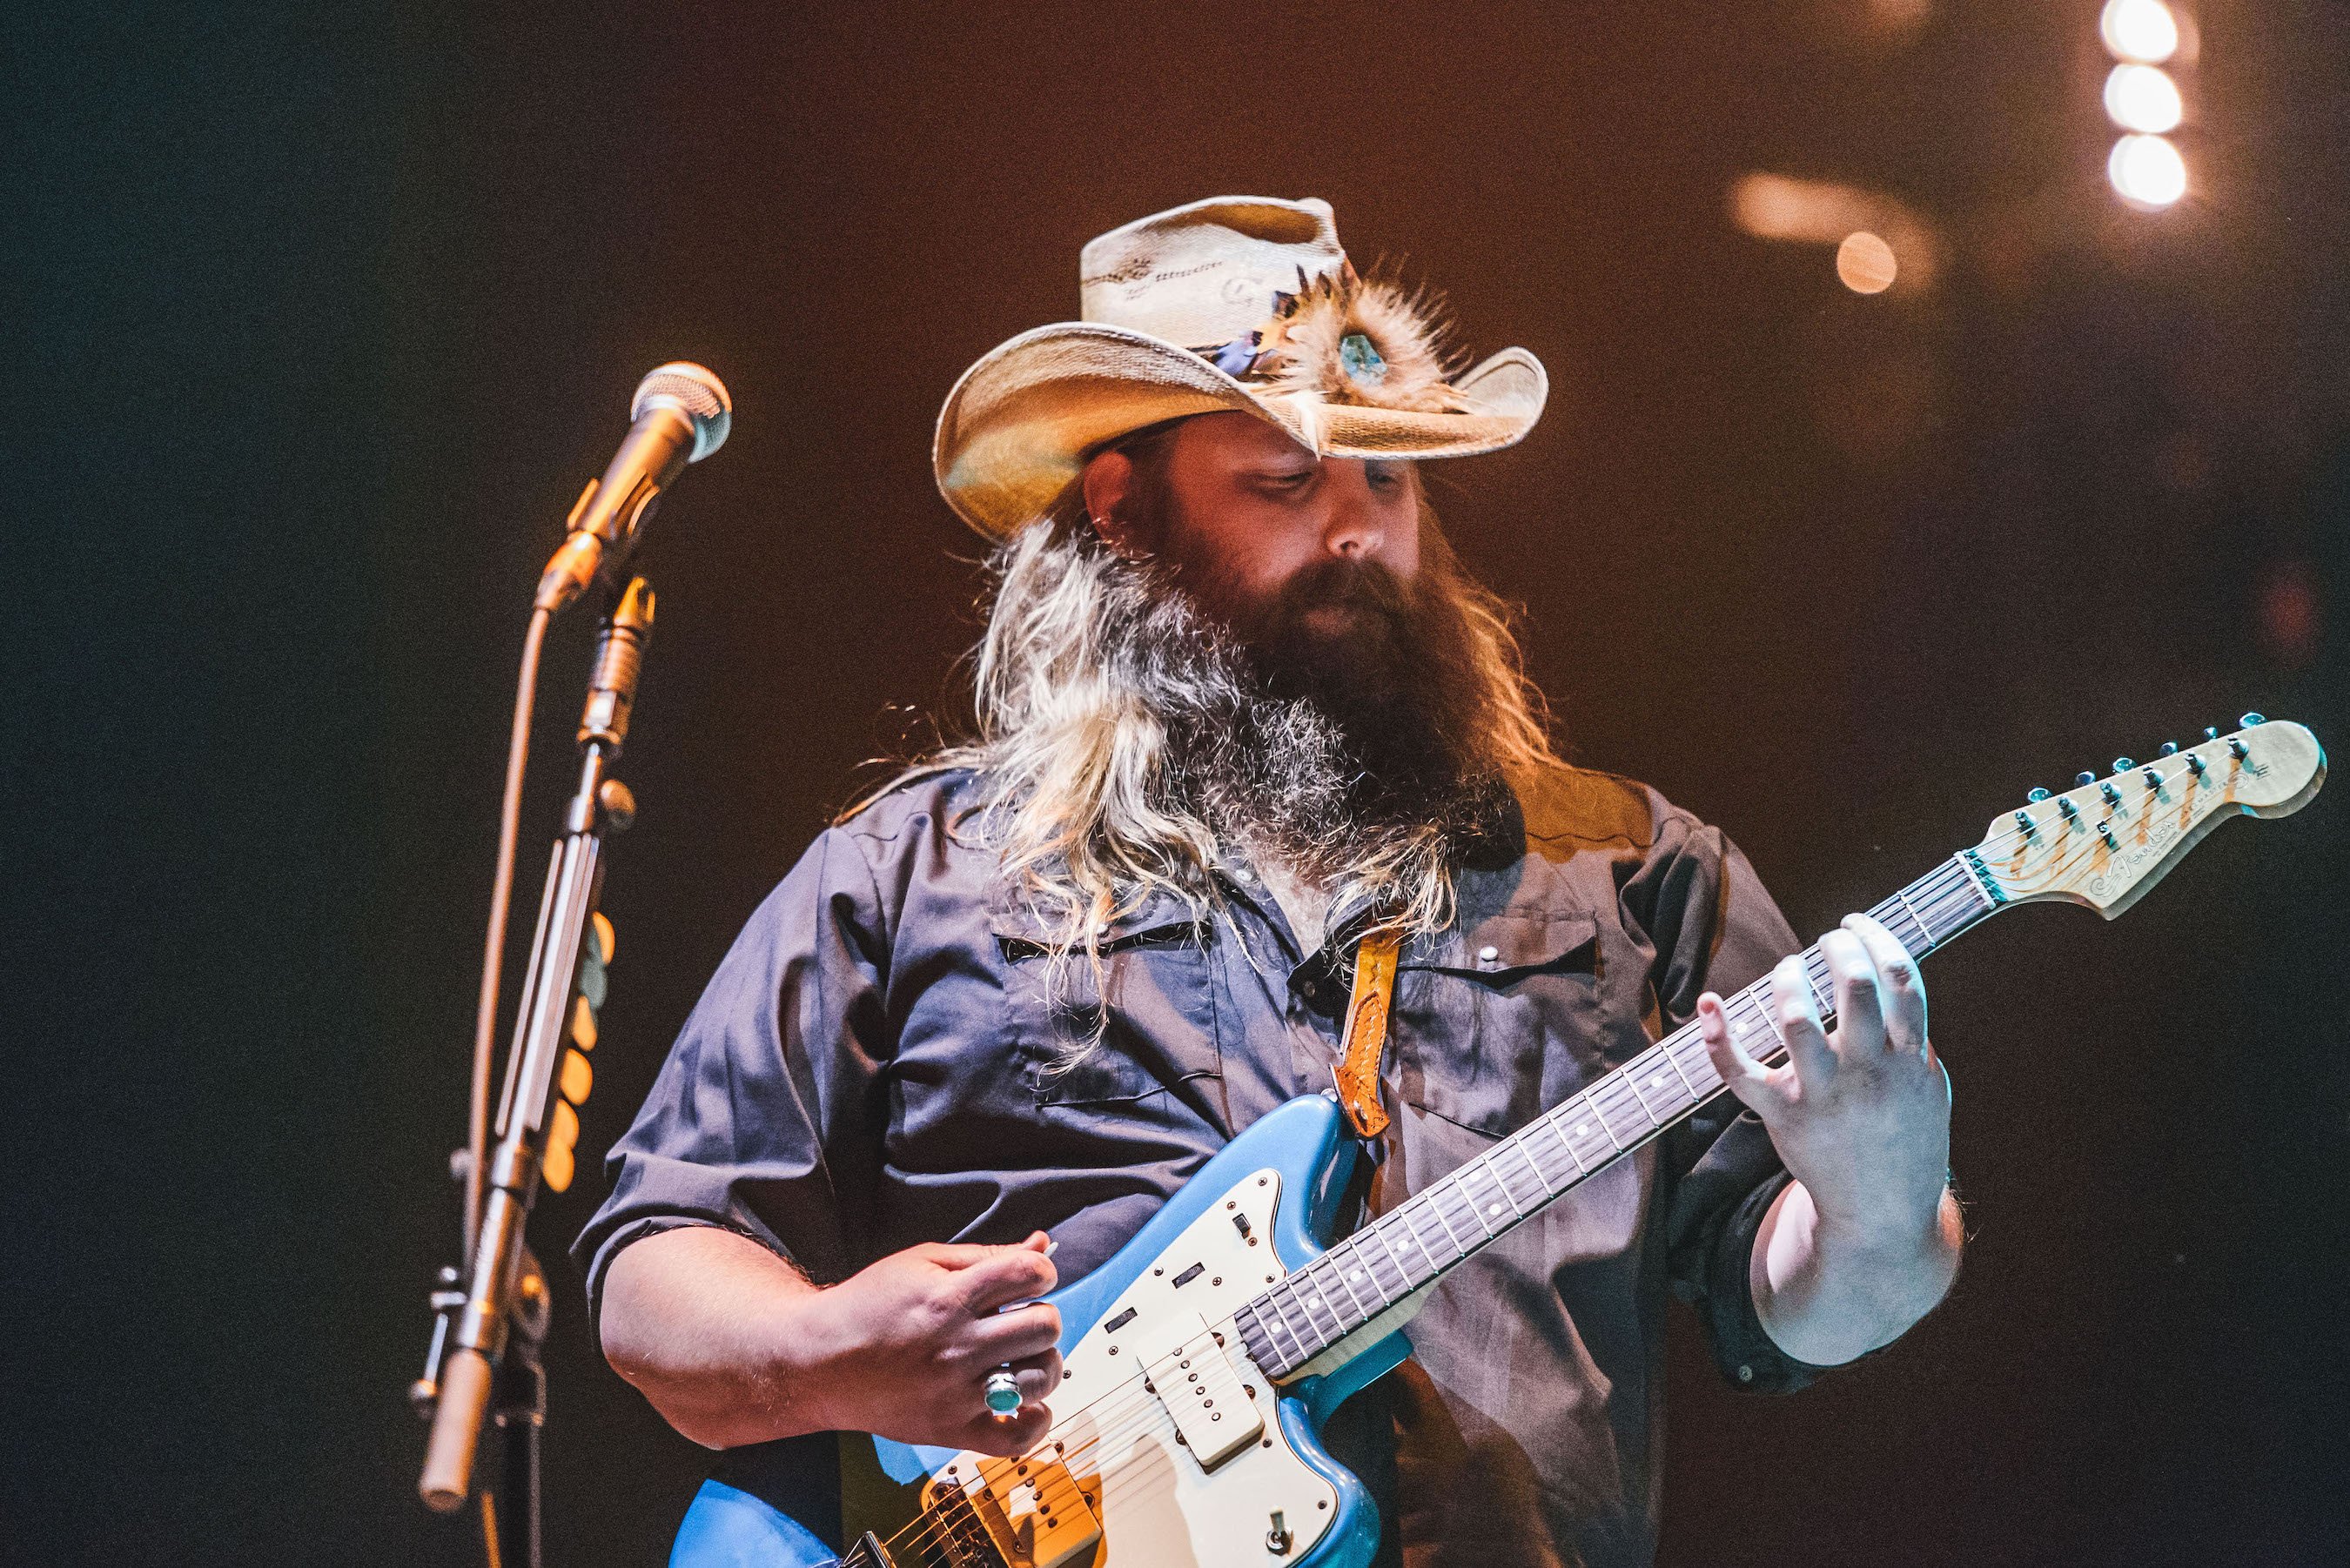 Chris Stapleton performs on day 3 of C2C - Country 2 Country festival at The O2 Arena